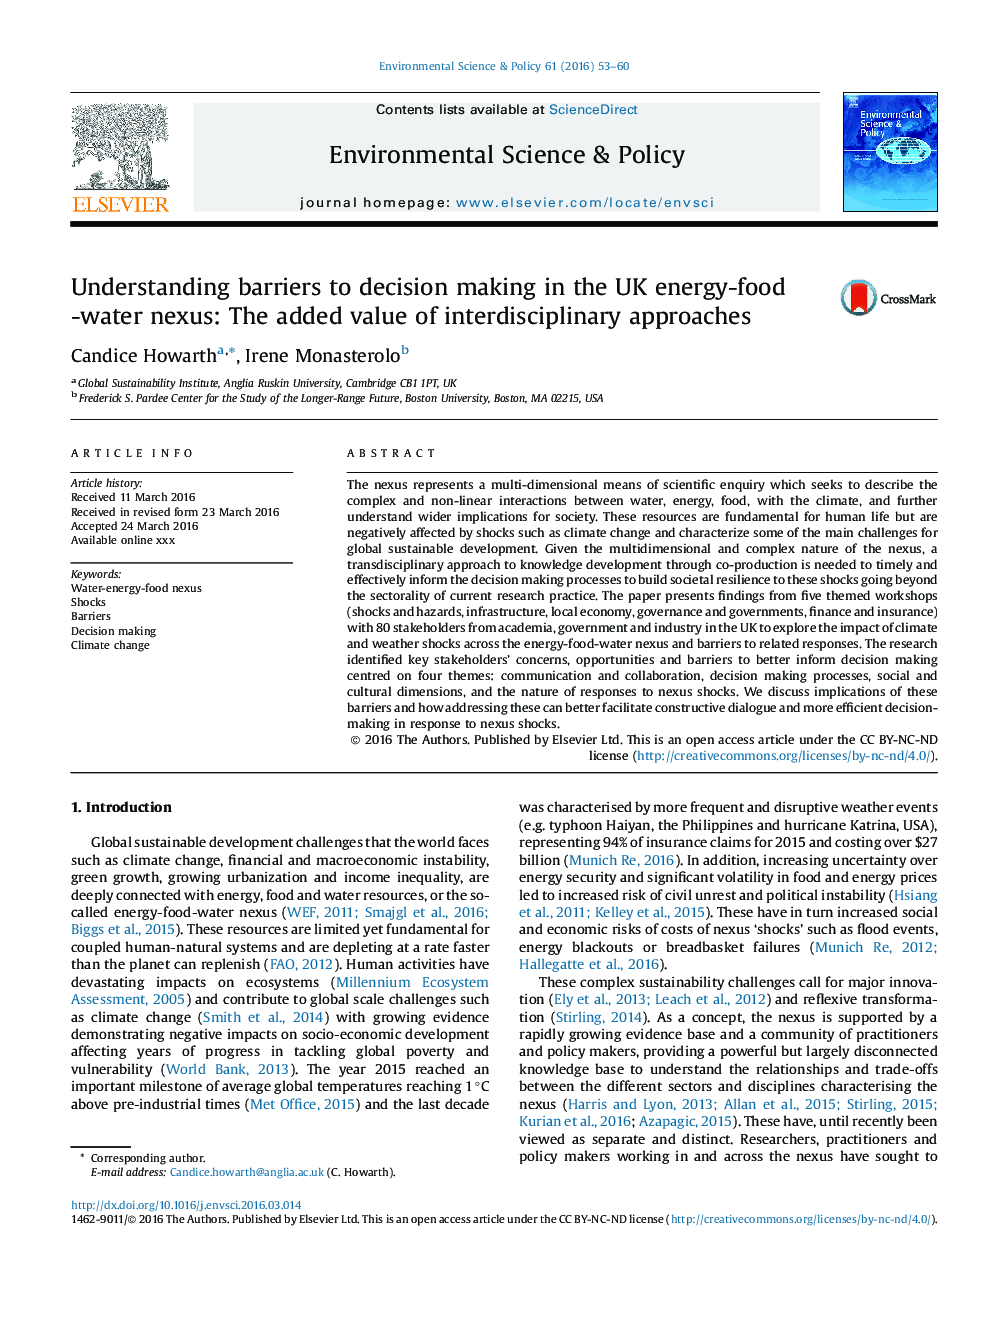 Understanding barriers to decision making in the UK energy-food-water nexus: The added value of interdisciplinary approaches